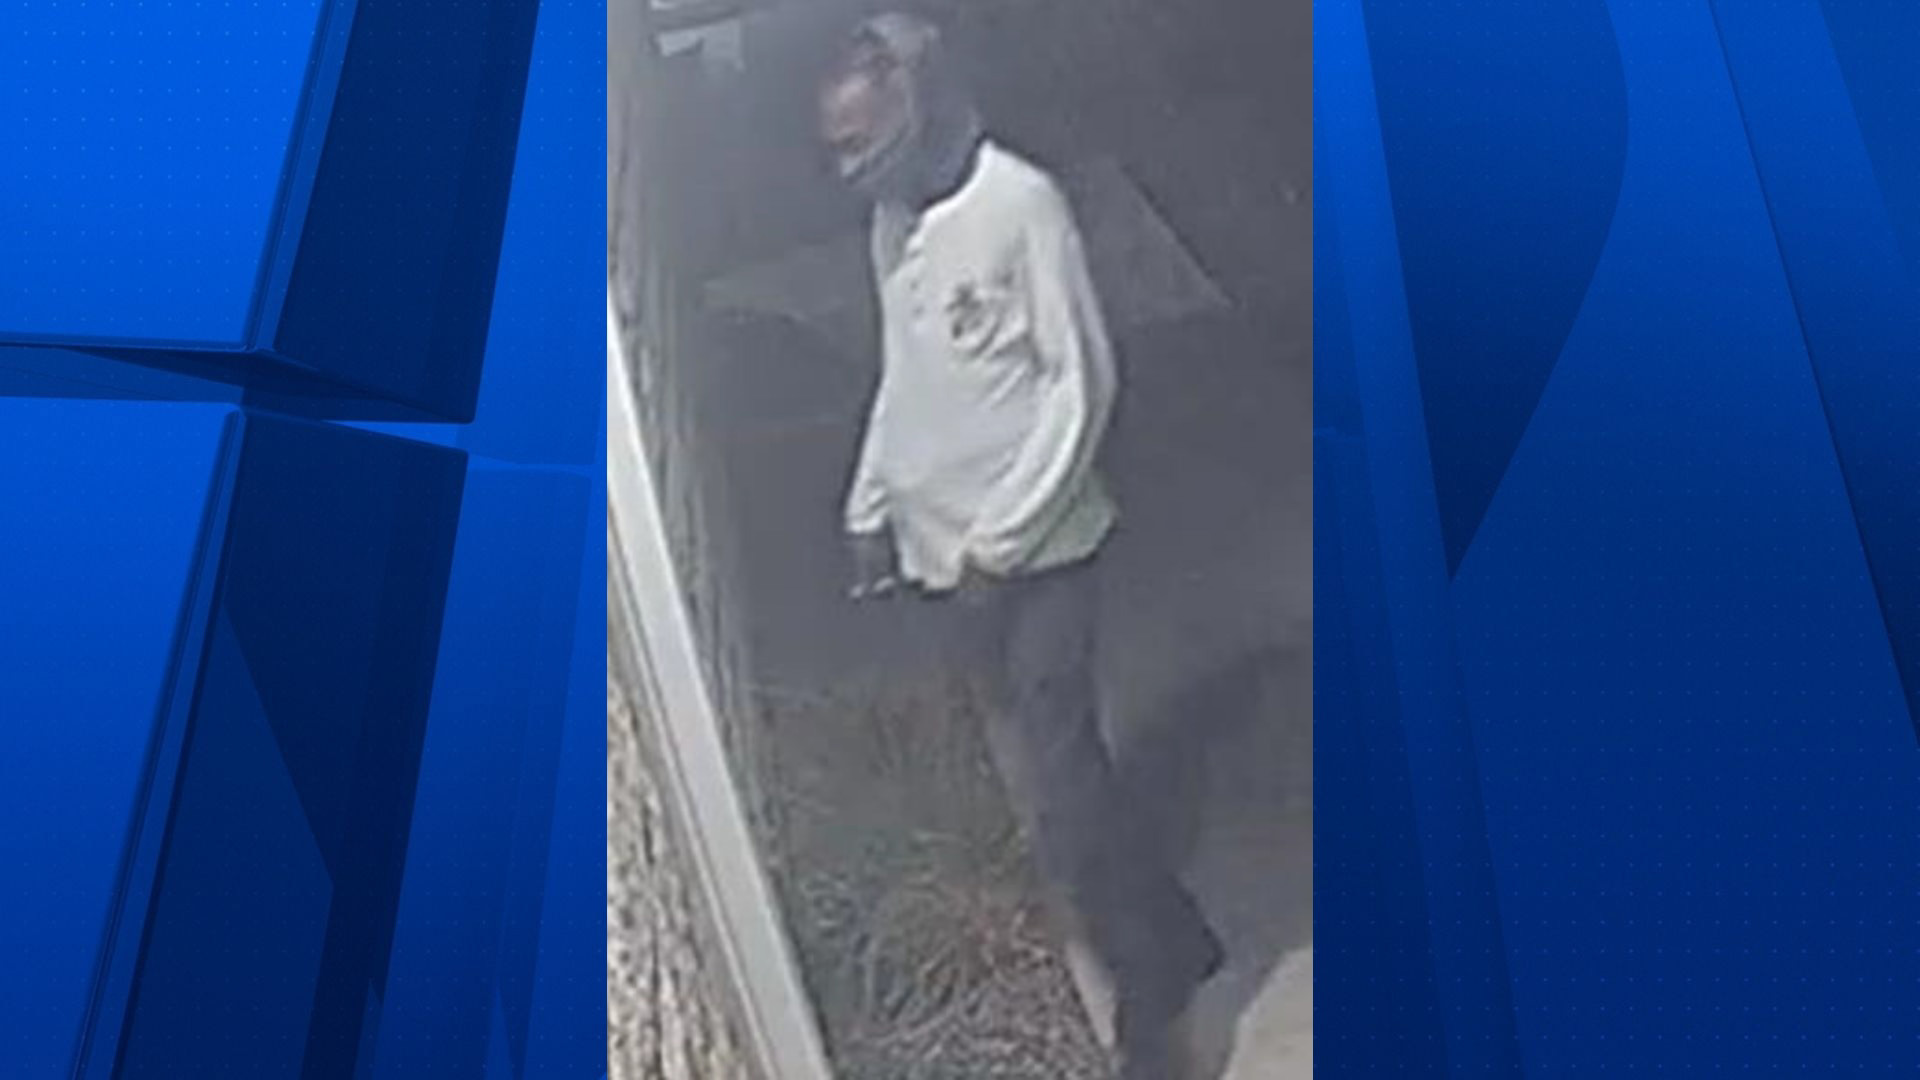 Tempe police searching for sexual assault suspect who broke into home